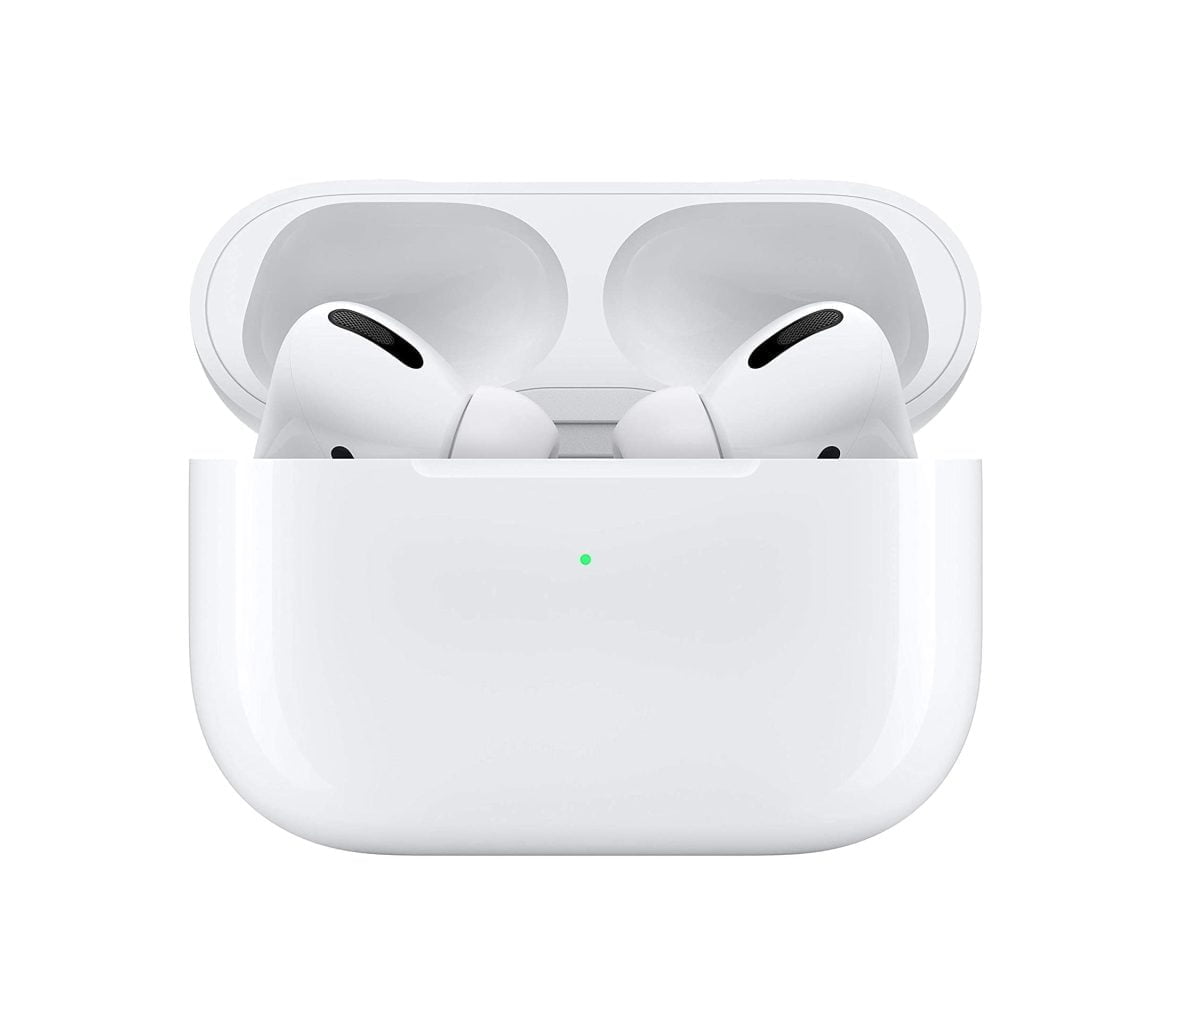 Apple Airpods Pro Apple &Lt;Table Class=&Quot;A-Normal A-Spacing-Micro&Quot;&Gt; &Lt;Tbody&Gt; &Lt;Tr Class=&Quot;A-Spacing-Small&Quot;&Gt; &Lt;Td Class=&Quot;A-Span3&Quot;&Gt;&Lt;Span Class=&Quot;A-Size-Base A-Text-Bold&Quot;&Gt;Brand&Lt;/Span&Gt;&Lt;/Td&Gt; &Lt;Td Class=&Quot;A-Span9&Quot;&Gt;&Lt;Span Class=&Quot;A-Size-Base&Quot;&Gt;Apple&Lt;/Span&Gt;&Lt;/Td&Gt; &Lt;/Tr&Gt; &Lt;Tr Class=&Quot;A-Spacing-Small&Quot;&Gt; &Lt;Td Class=&Quot;A-Span3&Quot;&Gt;&Lt;Span Class=&Quot;A-Size-Base A-Text-Bold&Quot;&Gt;Connections&Lt;/Span&Gt;&Lt;/Td&Gt; &Lt;Td Class=&Quot;A-Span9&Quot;&Gt;&Lt;Span Class=&Quot;A-Size-Base&Quot;&Gt;Wireless&Lt;/Span&Gt;&Lt;/Td&Gt; &Lt;/Tr&Gt; &Lt;Tr Class=&Quot;A-Spacing-Small&Quot;&Gt; &Lt;Td Class=&Quot;A-Span3&Quot;&Gt;&Lt;Span Class=&Quot;A-Size-Base A-Text-Bold&Quot;&Gt;Model Name&Lt;/Span&Gt;&Lt;/Td&Gt; &Lt;Td Class=&Quot;A-Span9&Quot;&Gt;&Lt;Span Class=&Quot;A-Size-Base&Quot;&Gt;Apple Airpods Pro&Lt;/Span&Gt;&Lt;/Td&Gt; &Lt;/Tr&Gt; &Lt;Tr Class=&Quot;A-Spacing-Small&Quot;&Gt; &Lt;Td Class=&Quot;A-Span3&Quot;&Gt;&Lt;Span Class=&Quot;A-Size-Base A-Text-Bold&Quot;&Gt;Color&Lt;/Span&Gt;&Lt;/Td&Gt; &Lt;Td Class=&Quot;A-Span9&Quot;&Gt;&Lt;Span Class=&Quot;A-Size-Base&Quot;&Gt;White&Lt;/Span&Gt;&Lt;/Td&Gt; &Lt;/Tr&Gt; &Lt;Tr Class=&Quot;A-Spacing-Small&Quot;&Gt; &Lt;Td Class=&Quot;A-Span3&Quot;&Gt;&Lt;Span Class=&Quot;A-Size-Base A-Text-Bold&Quot;&Gt;Headphones Form Factor&Lt;/Span&Gt;&Lt;/Td&Gt; &Lt;Td Class=&Quot;A-Span9&Quot;&Gt;&Lt;Span Class=&Quot;A-Size-Base&Quot;&Gt;In Ear&Lt;/Span&Gt;&Lt;/Td&Gt; &Lt;/Tr&Gt; &Lt;/Tbody&Gt; &Lt;/Table&Gt; &Lt;H1 Class=&Quot;A-Size-Base-Plus A-Text-Bold&Quot;&Gt;About This Item&Lt;/H1&Gt; &Lt;Ul Class=&Quot;A-Unordered-List A-Vertical A-Spacing-Mini&Quot;&Gt; &Lt;Li&Gt;&Lt;Span Class=&Quot;A-List-Item&Quot;&Gt;Active Noise Cancellation For Immersive Sound&Lt;/Span&Gt;&Lt;/Li&Gt; &Lt;Li&Gt;&Lt;Span Class=&Quot;A-List-Item&Quot;&Gt;Transparency Mode For Hearing And Connecting With The World Around You&Lt;/Span&Gt;&Lt;/Li&Gt; &Lt;Li&Gt;&Lt;Span Class=&Quot;A-List-Item&Quot;&Gt;Three Sizes Of Soft, Tapered Silicone Tips For A Customizable Fit&Lt;/Span&Gt;&Lt;/Li&Gt; &Lt;Li&Gt;&Lt;Span Class=&Quot;A-List-Item&Quot;&Gt;Sweat And Water-Resistant&Lt;/Span&Gt;&Lt;/Li&Gt; &Lt;Li&Gt;&Lt;Span Class=&Quot;A-List-Item&Quot;&Gt;Adaptive Eq Automatically Tunes The Music To The Shape Of Your Ear&Lt;/Span&Gt;&Lt;/Li&Gt; &Lt;Li&Gt;&Lt;Span Class=&Quot;A-List-Item&Quot;&Gt;Easy Setup For All Your Apple Devices&Lt;/Span&Gt;&Lt;/Li&Gt; &Lt;Li&Gt;&Lt;Span Class=&Quot;A-List-Item&Quot;&Gt;Quick Access To Siri By Saying “Hey Siri”&Lt;/Span&Gt;&Lt;/Li&Gt; &Lt;Li&Gt;&Lt;Span Class=&Quot;A-List-Item&Quot;&Gt;The Wireless Charging Case Delivers More Than 24 Hours Of Battery Life&Lt;/Span&Gt;&Lt;/Li&Gt; &Lt;/Ul&Gt; &Lt;Pre&Gt;One Year Apple Warranty&Lt;/Pre&Gt; Apple Airpods Pro Apple Airpods Pro With Wireless Charging Case | Mwp22Am/A